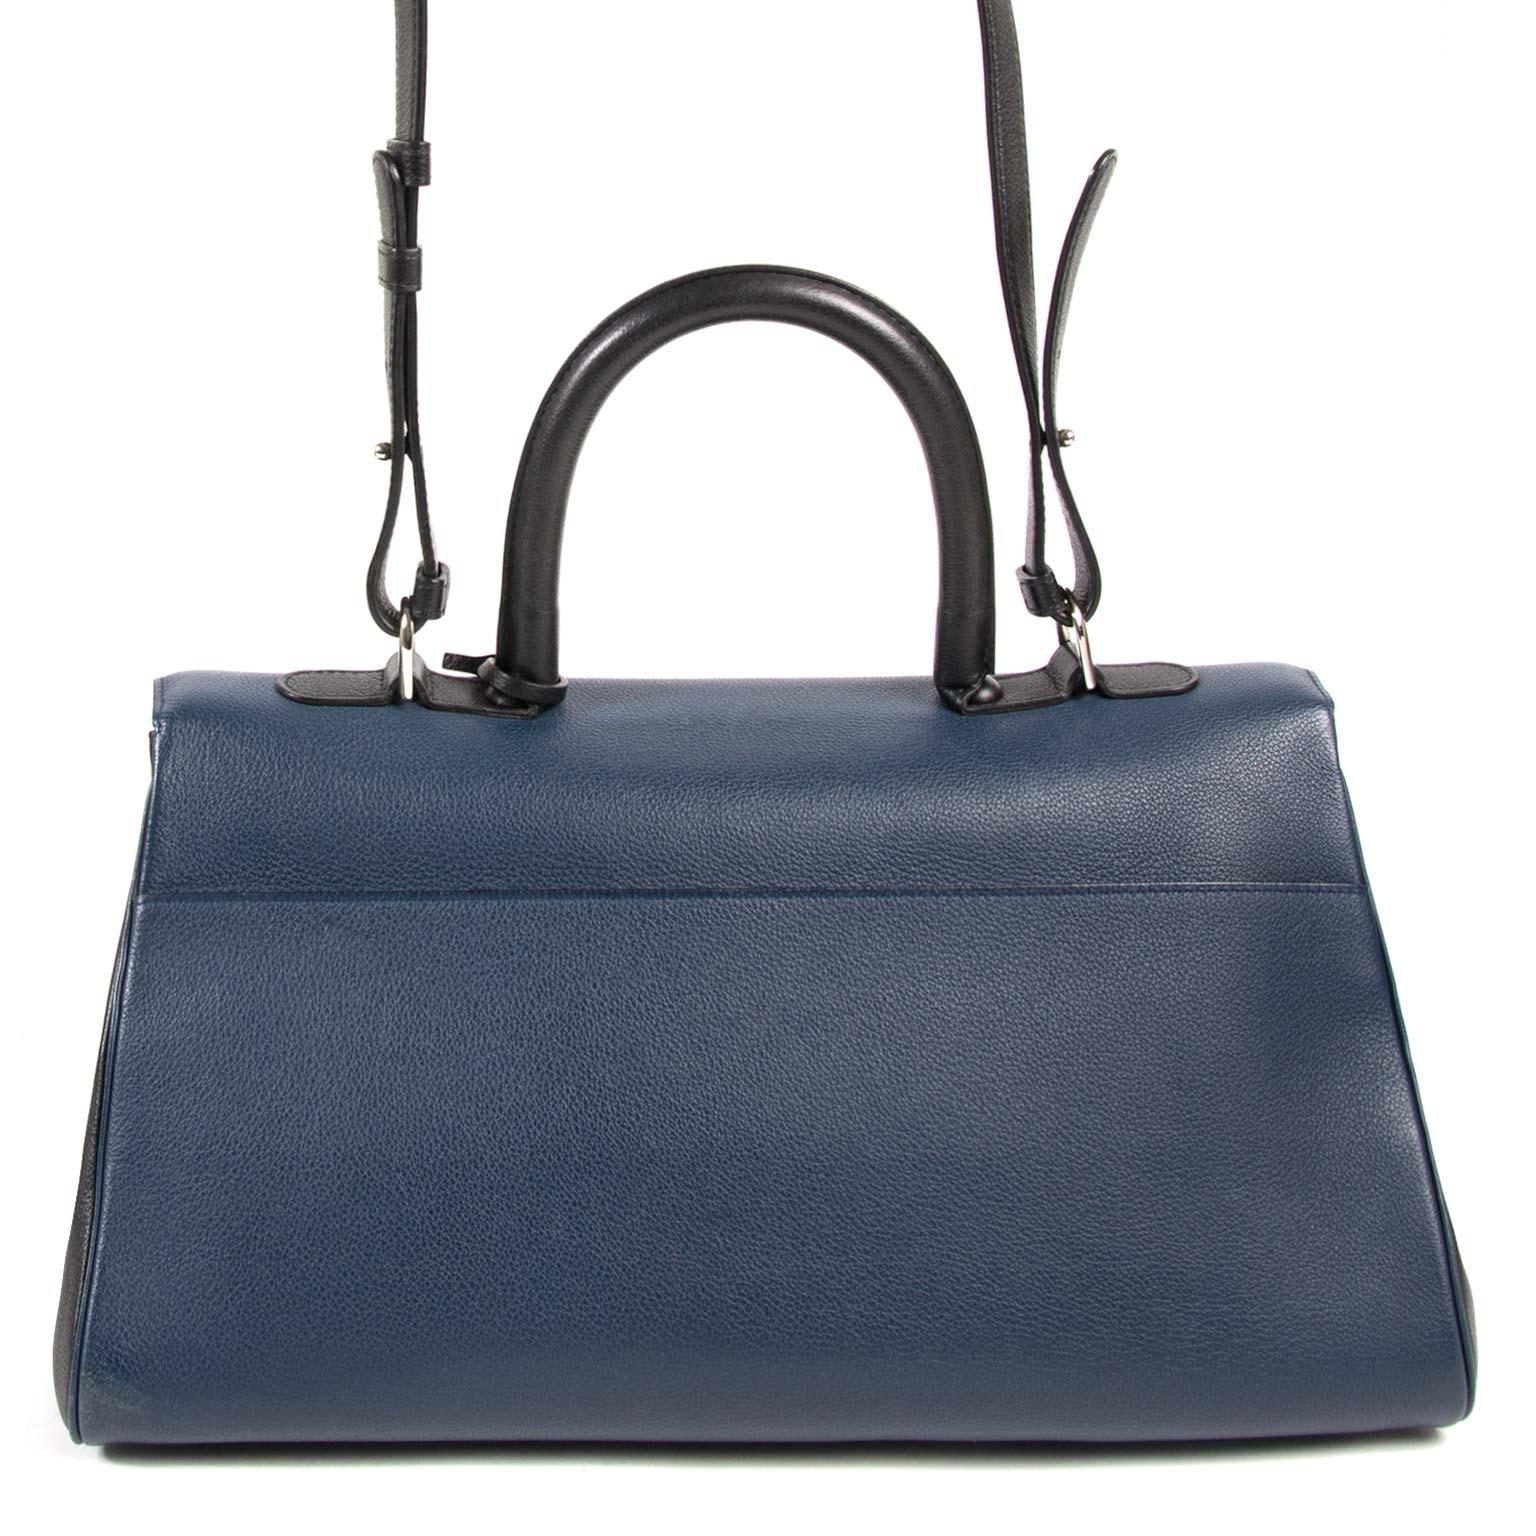 Excellent condition

Delvaux Brillant East West Sellier Bicolor Bag

A contemporary take on the classic Delvaux Brillant bag that has been around since '58: the Delvaux Brillant East-West has a modern, elongated shape whilst remainng true to the